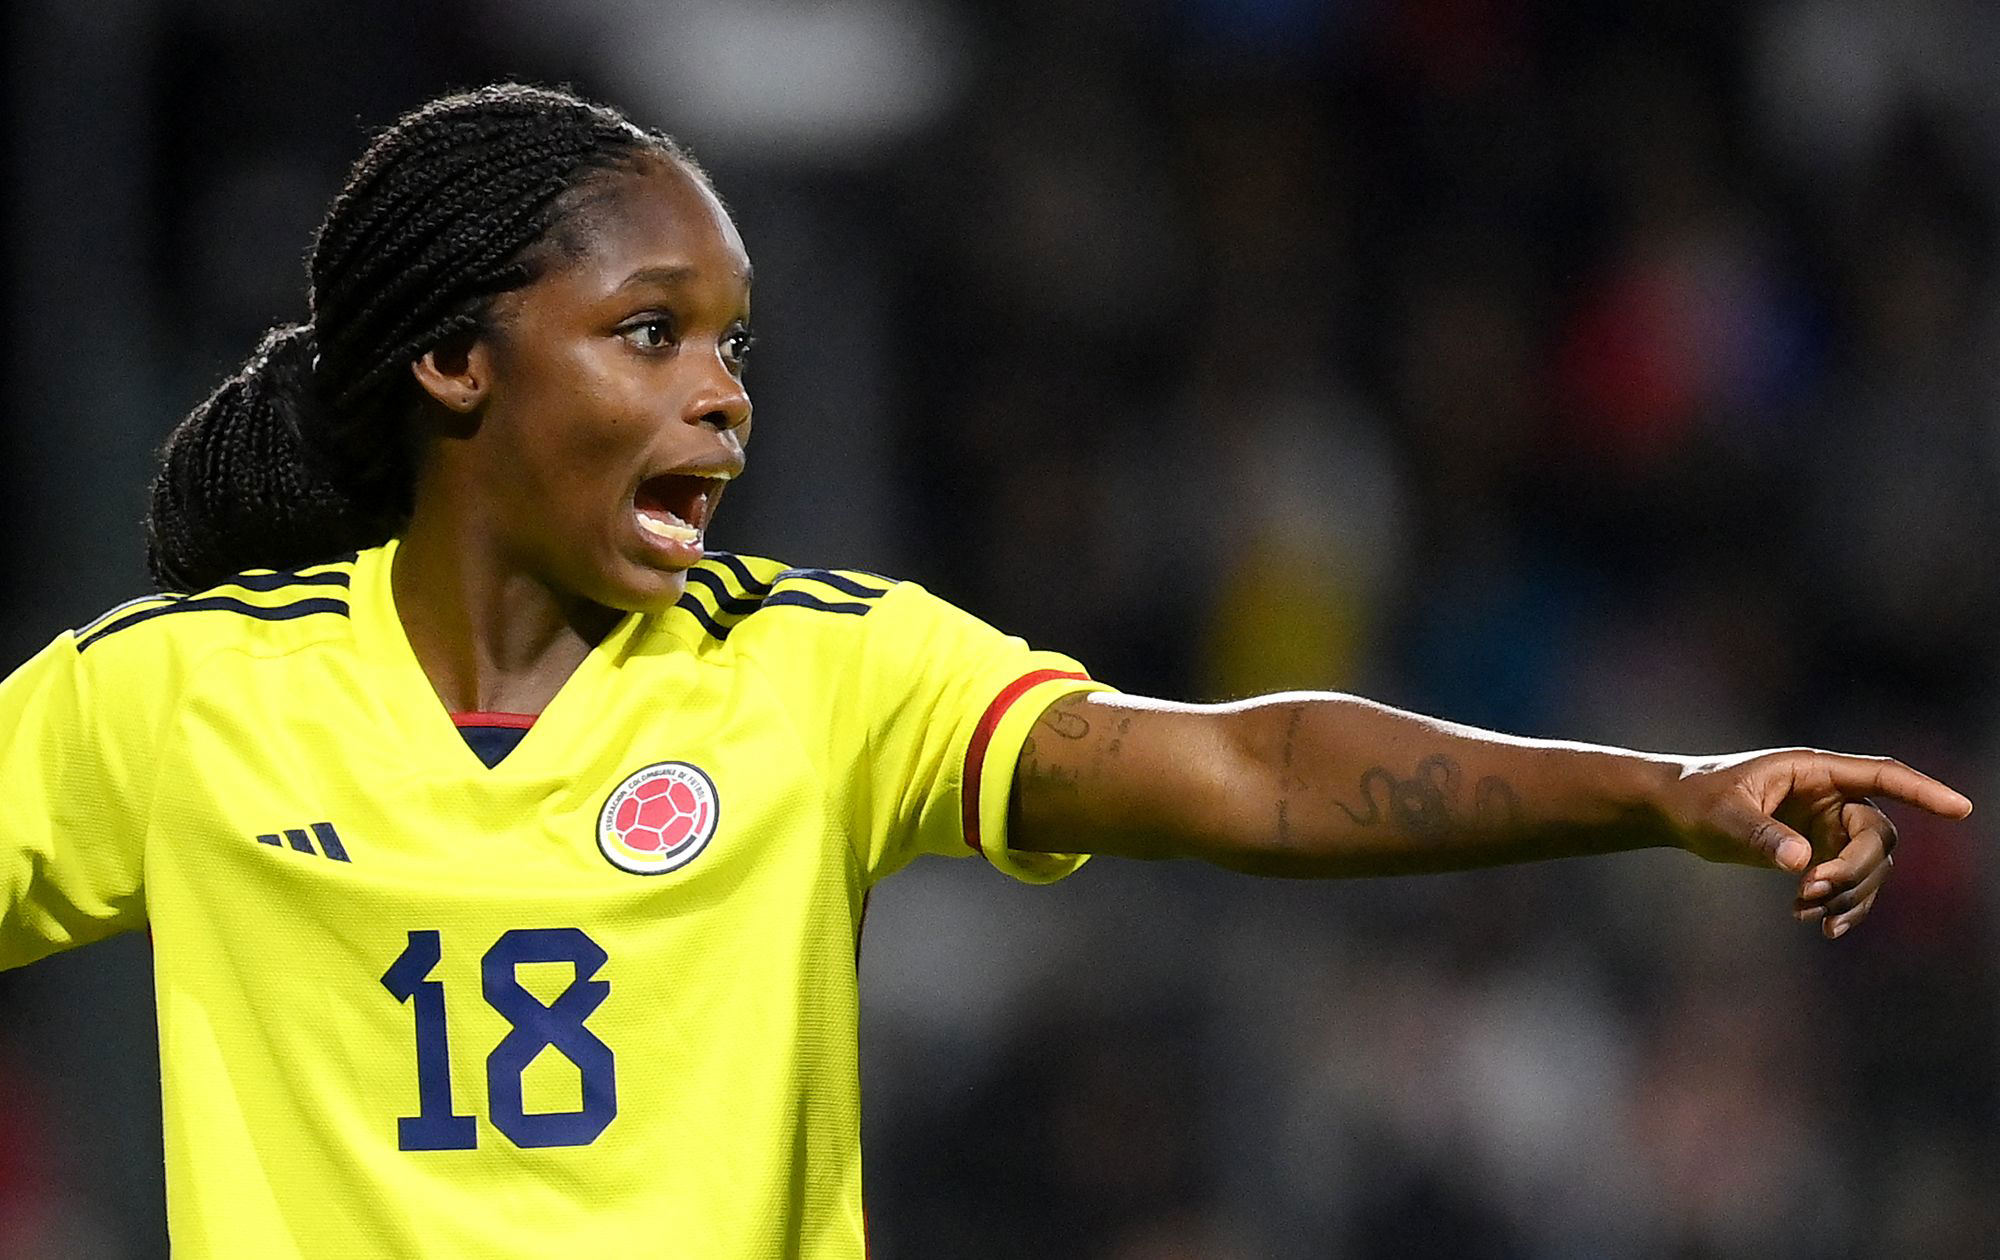 Colombia women’s soccer team roster players, profiles, stars